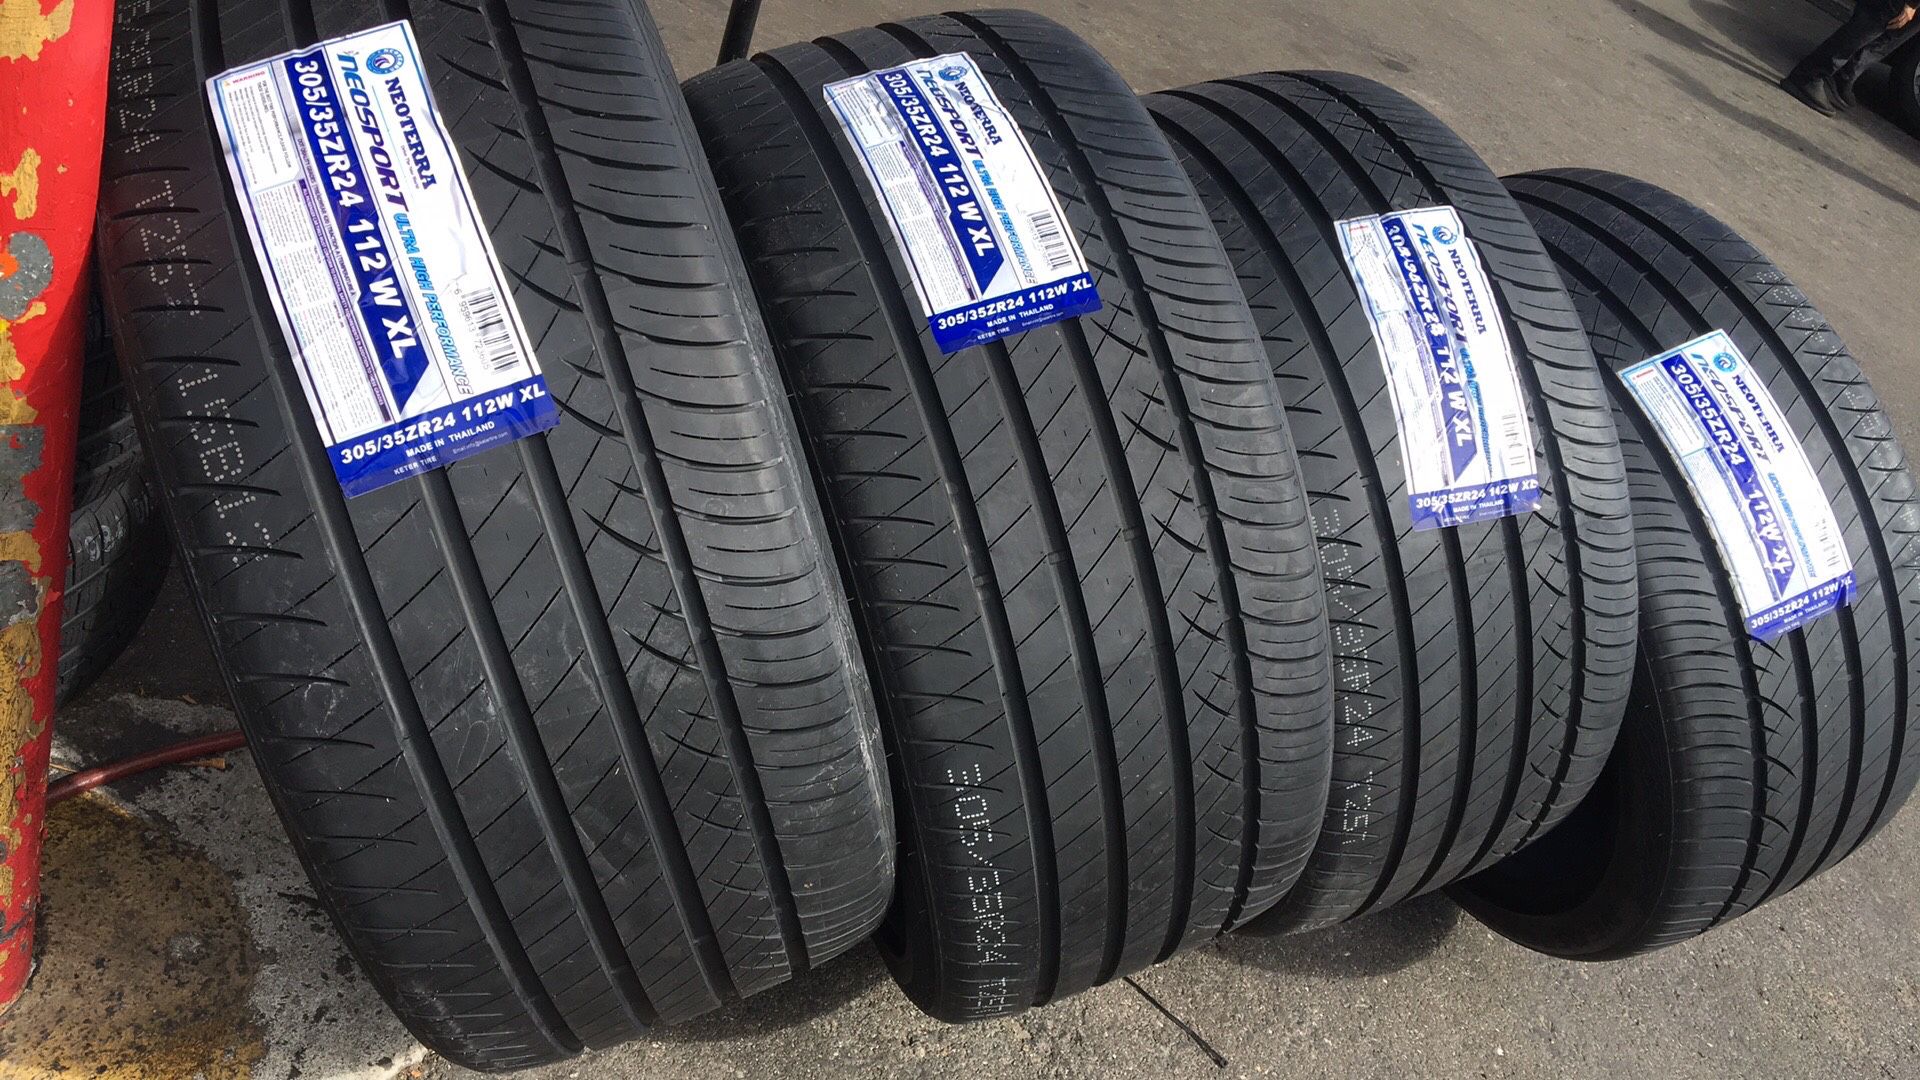 305/35R24 TIRES FOR TRUCK SUV $659 ALL 4 INSTALLED BALANCED 40k Mile Warranty